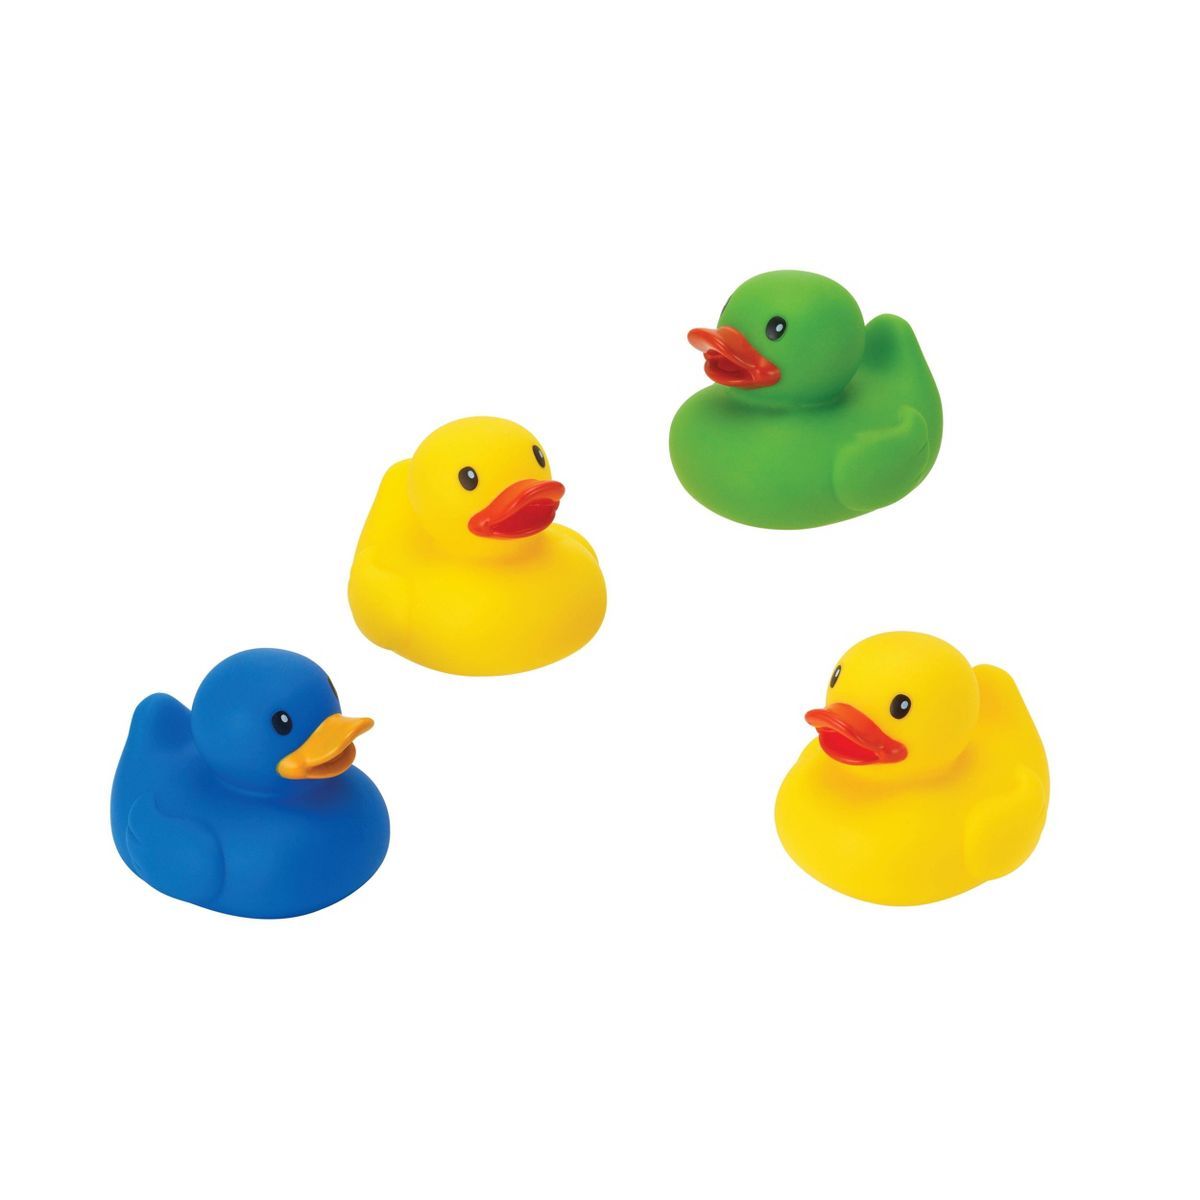 Infantino Duck House Bath Toy | Target